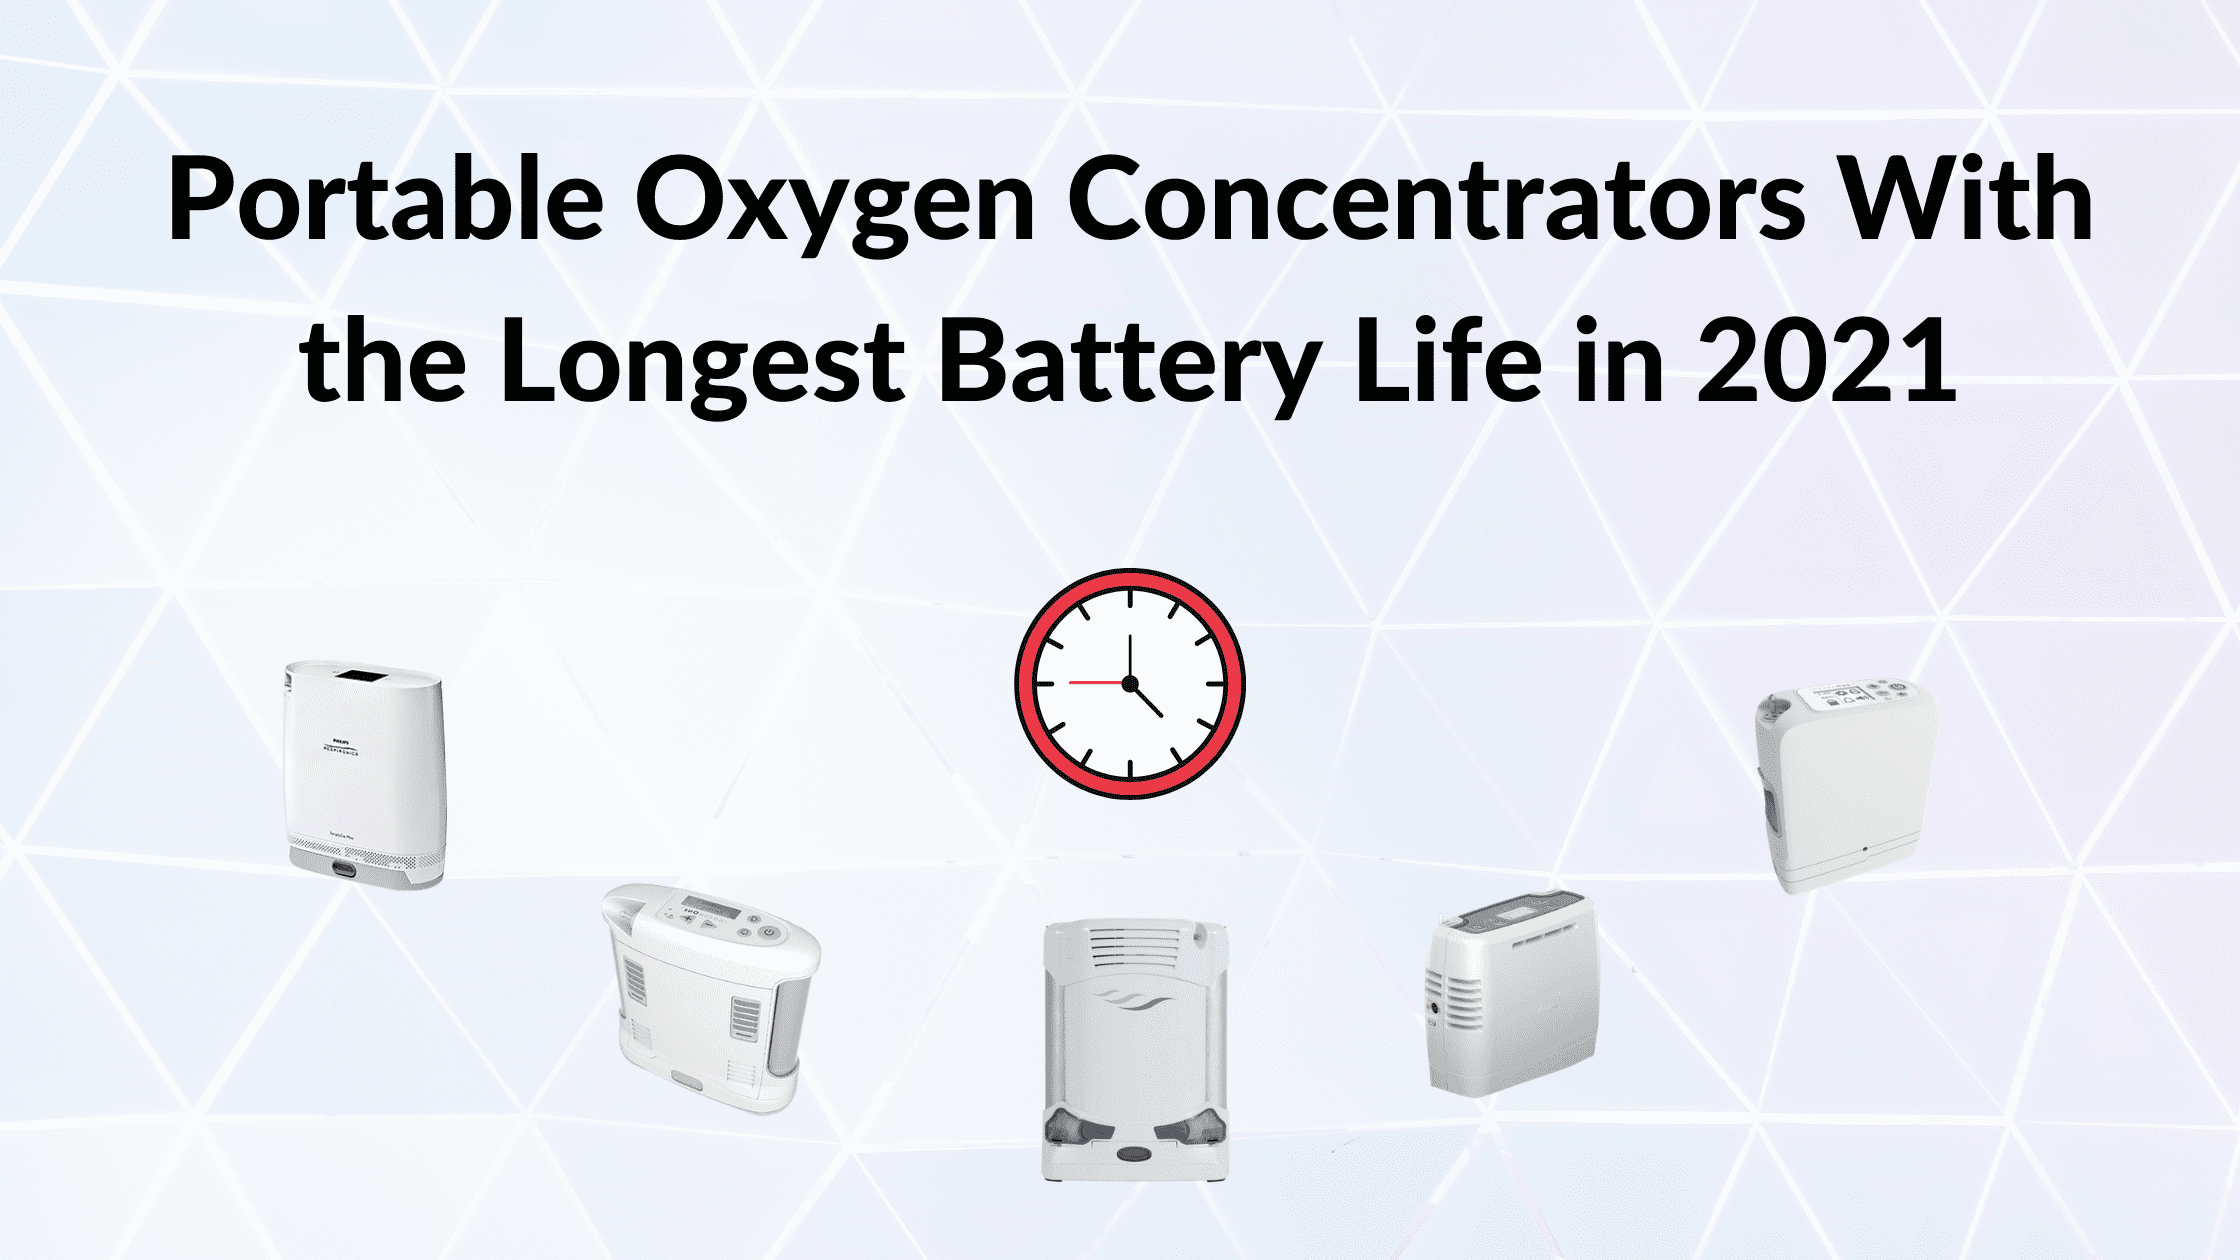 Portable Oxygen Concentrators With the Longest Battery Life in 2021